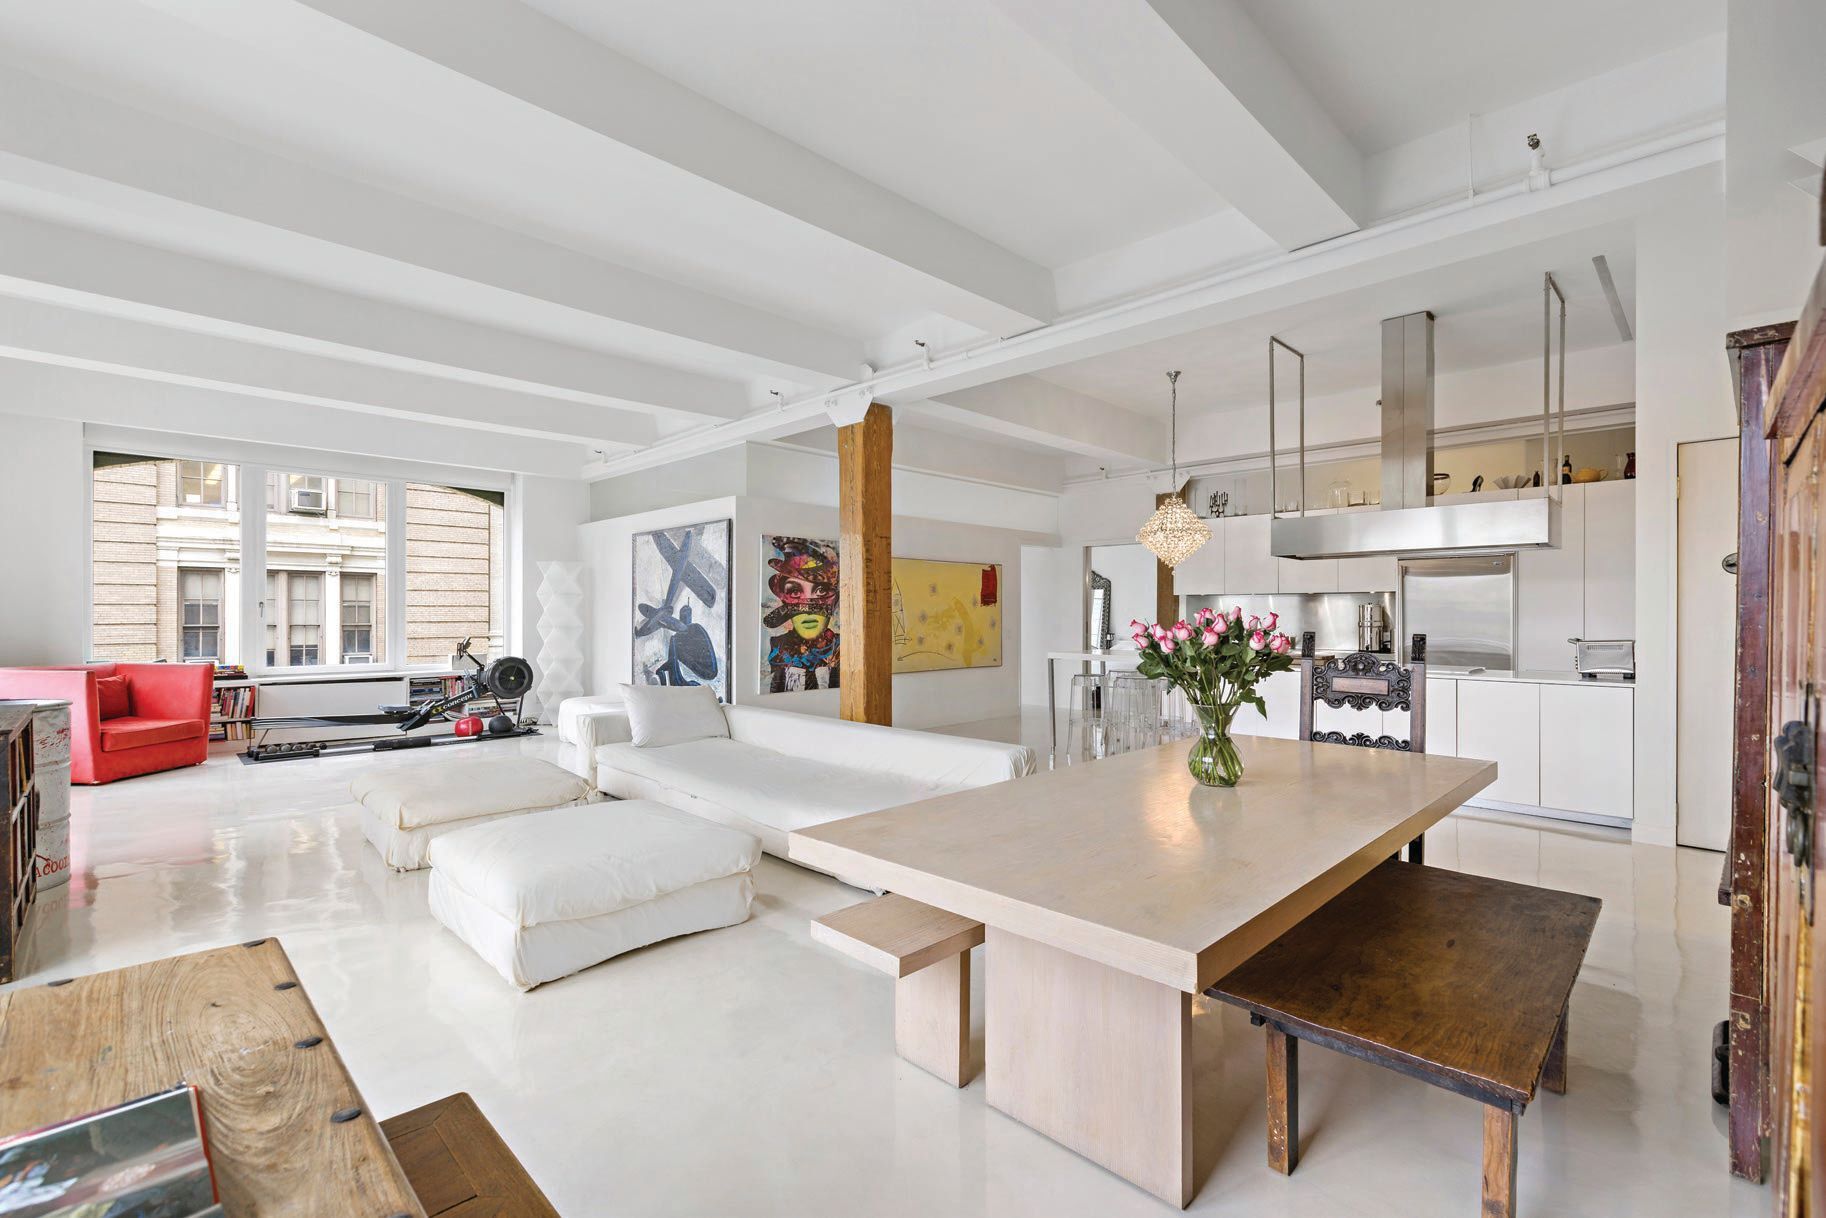 The sleek Soho home offers a serene space for a luxe staycation. PHOTO COURTESY OF BRAND